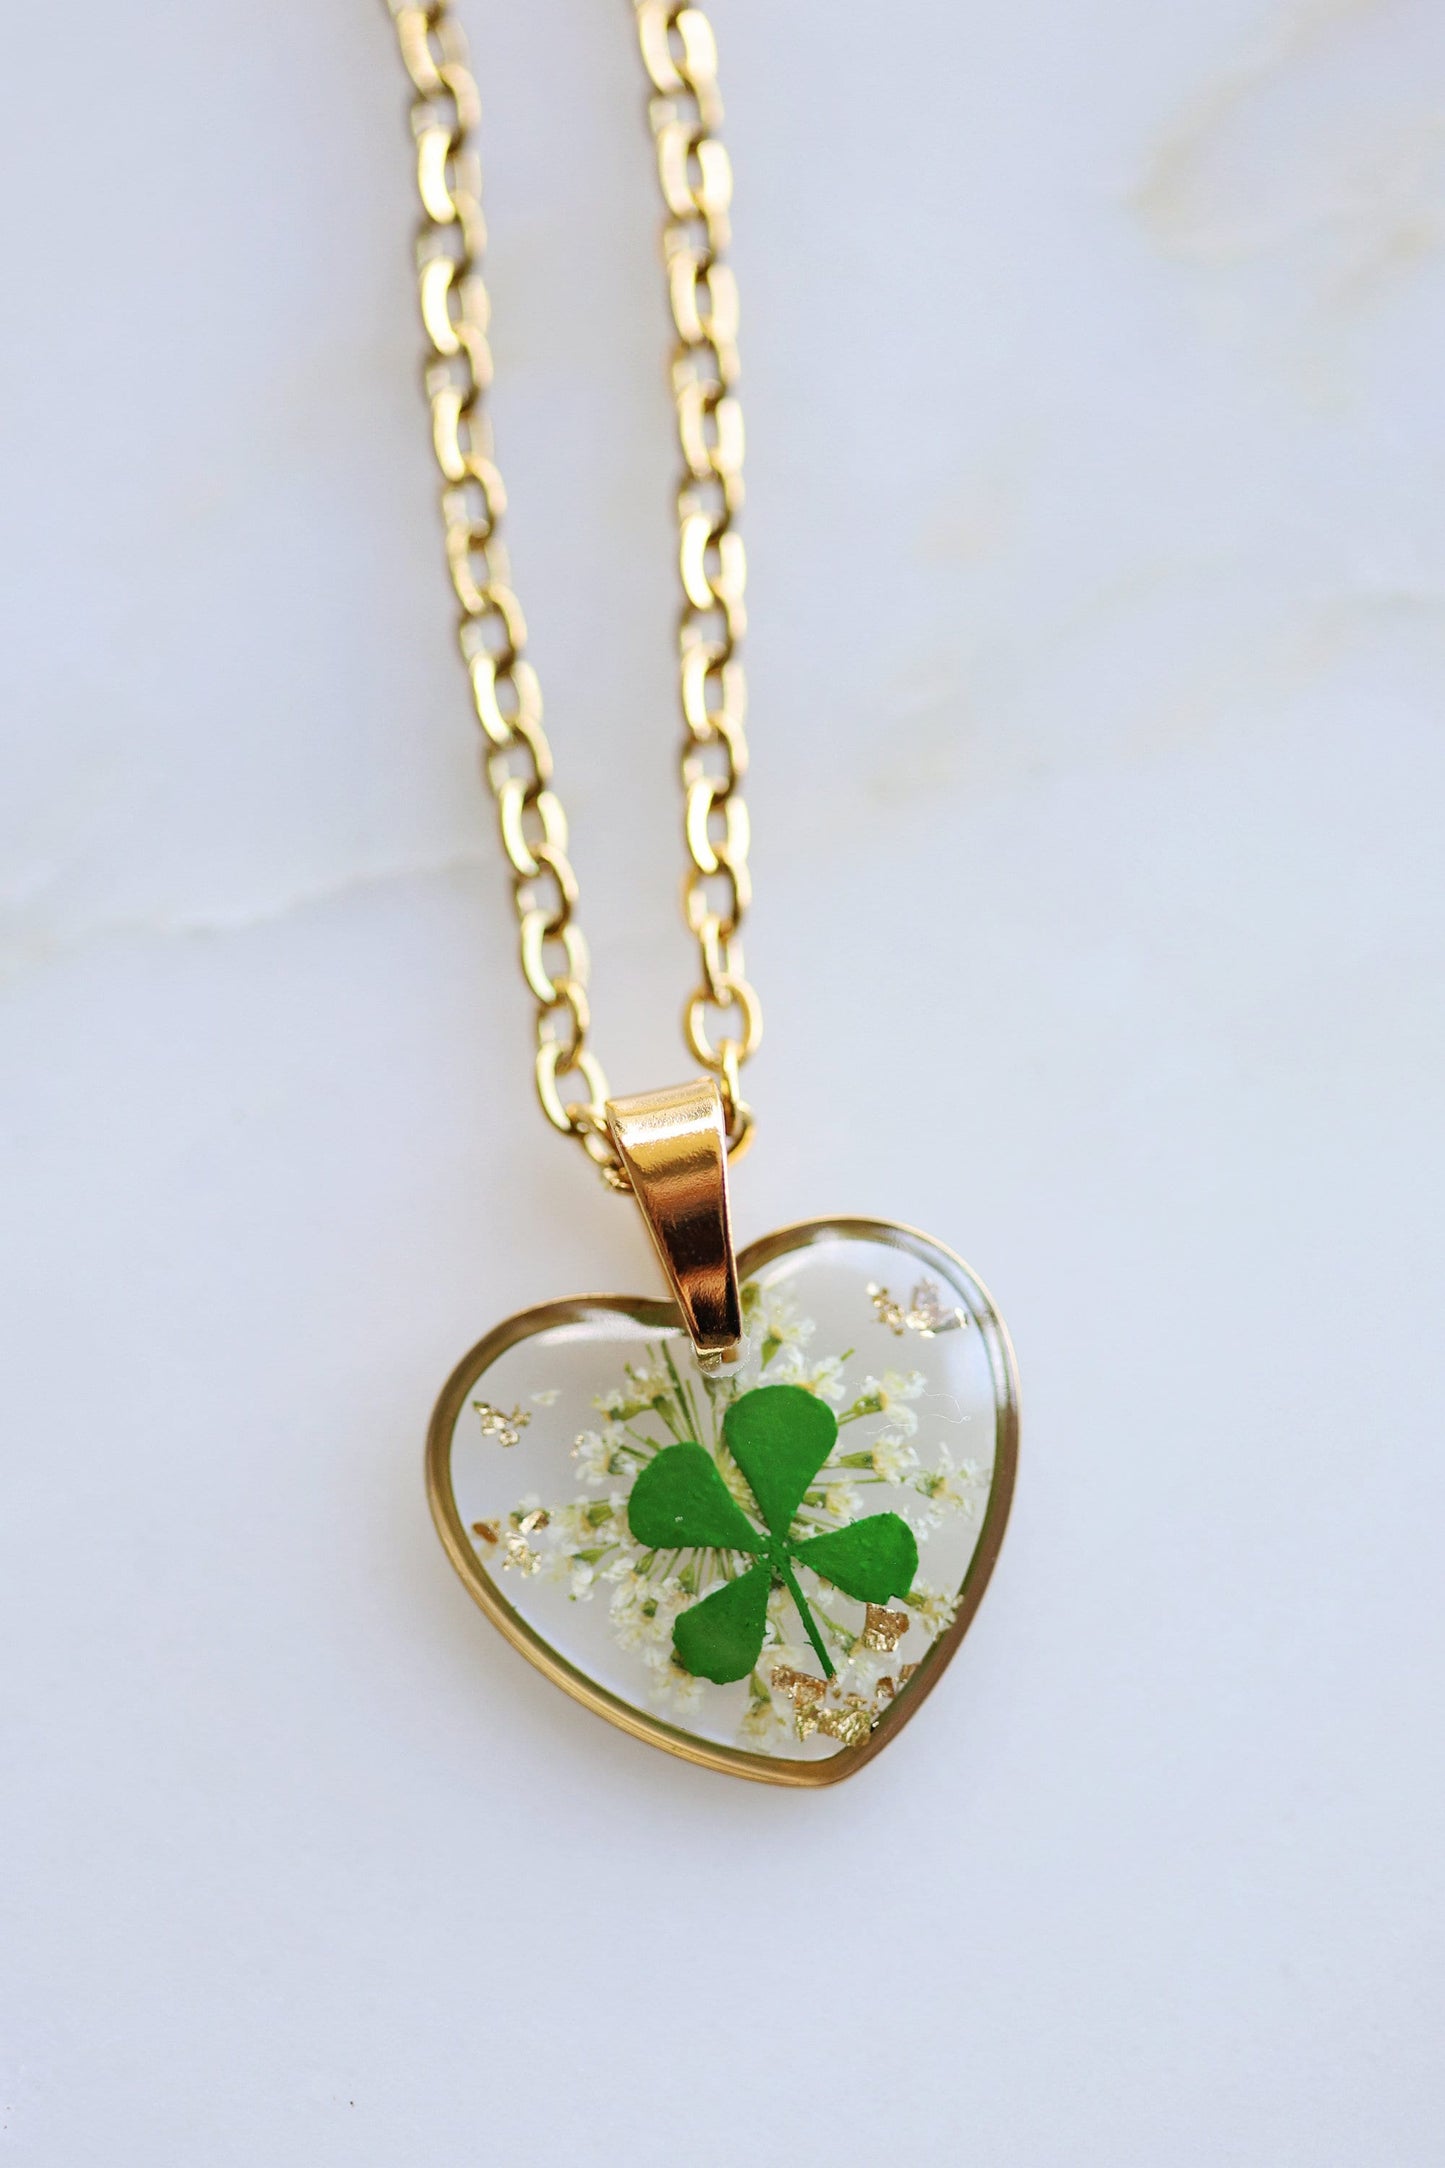 4 clover leaf bracelet | necklace dried and pressed botanic flower jewelry on resin pendant